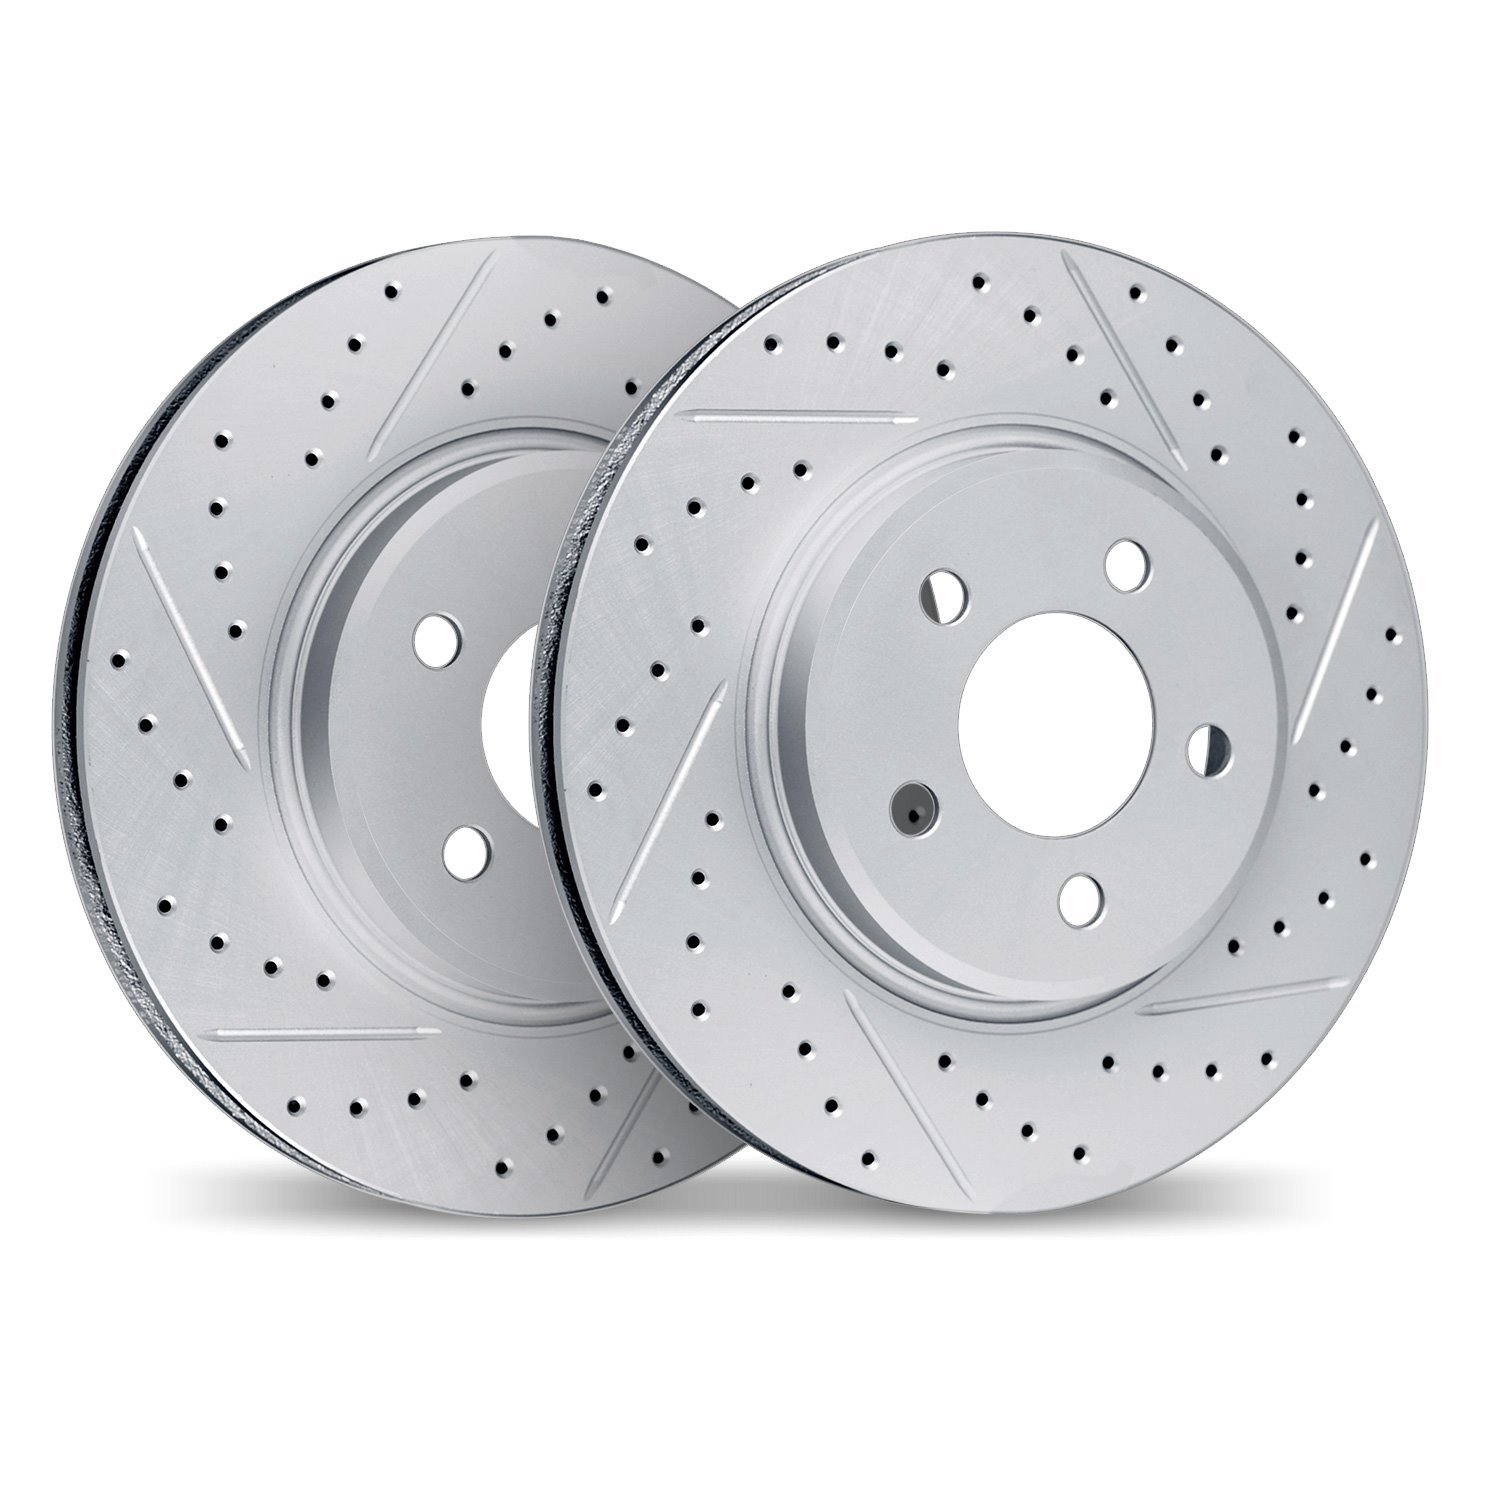 2002-54001 Geoperformance Drilled/Slotted Brake Rotors, 1983-1994 Ford/Lincoln/Mercury/Mazda, Position: Front